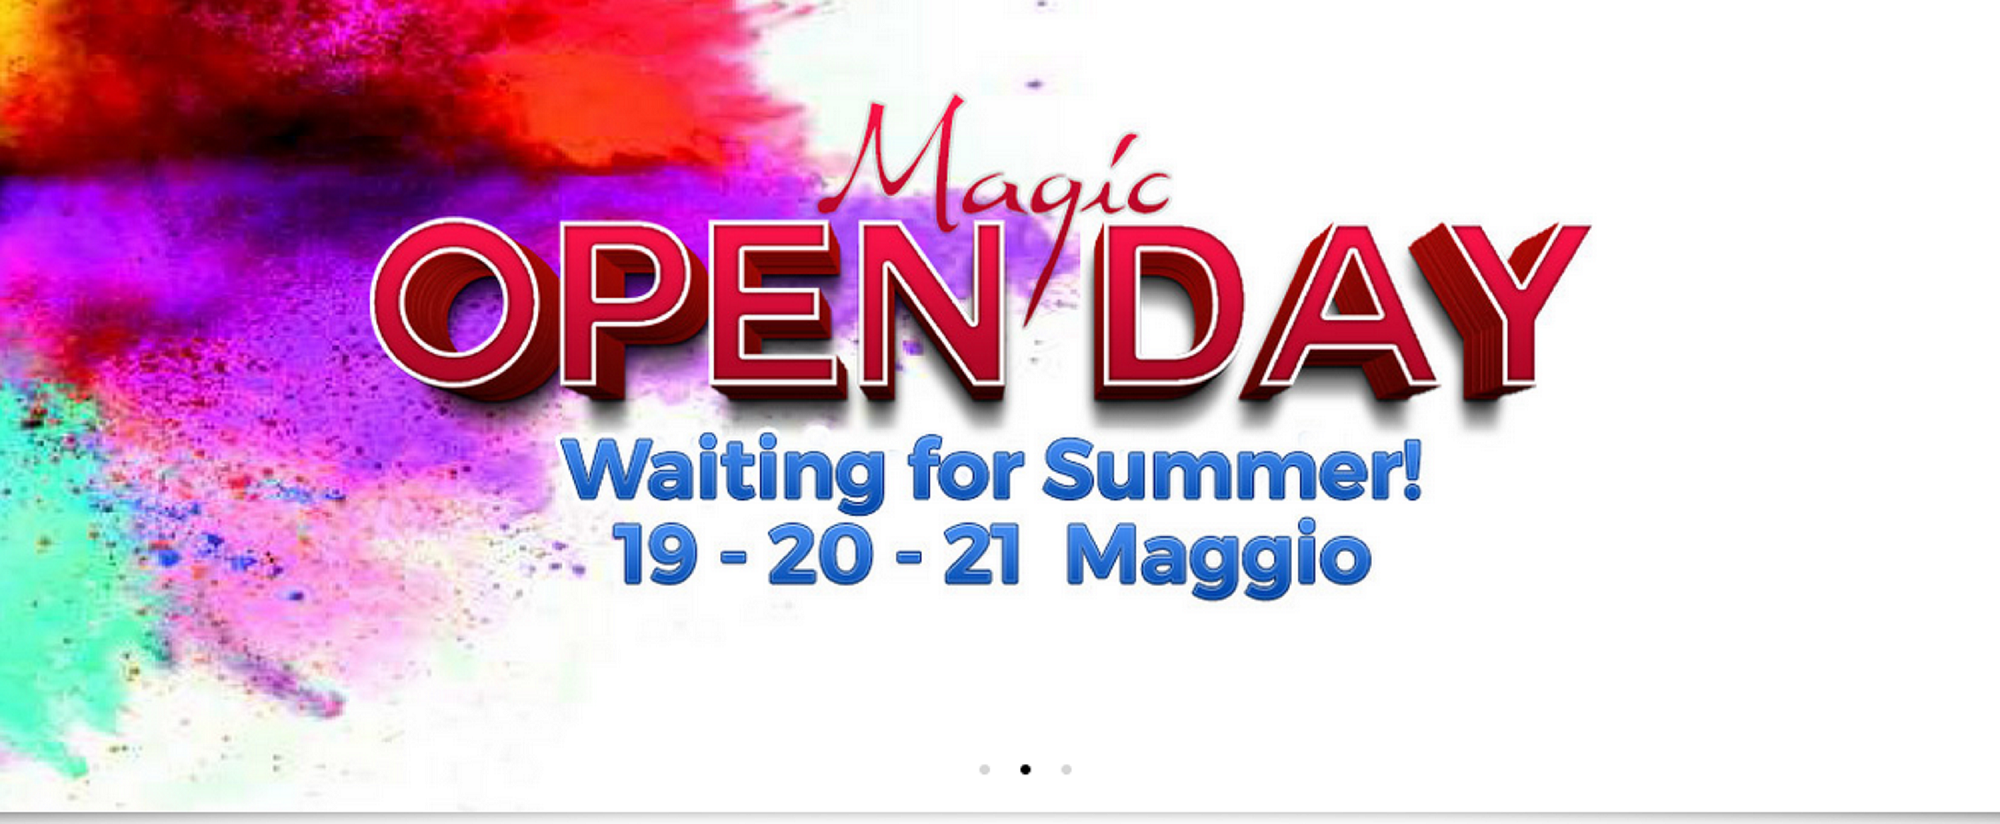 SAVE THE DATE: OPEN DAY “WAITING FOR SUMMER” BY RISTOPIU’ LOMBARDIA